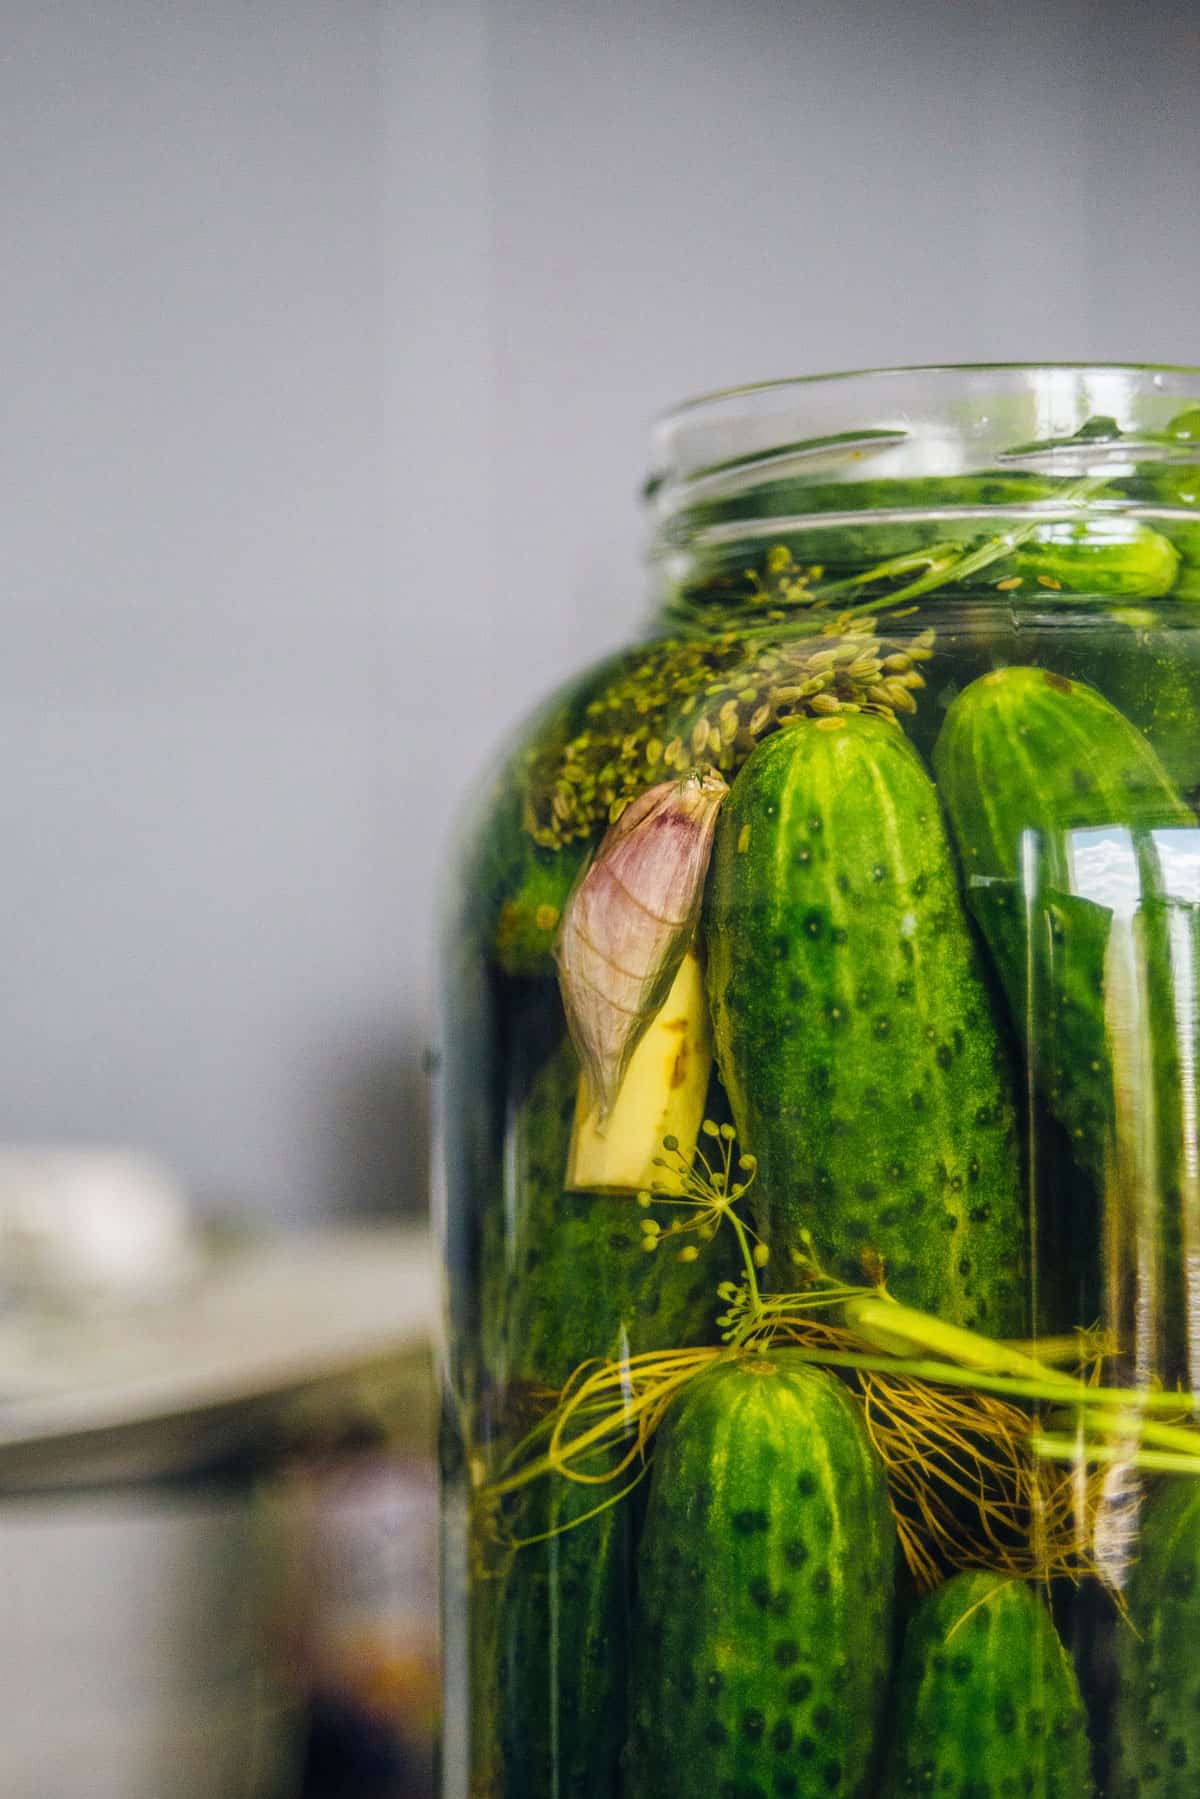 How to make sour pickles